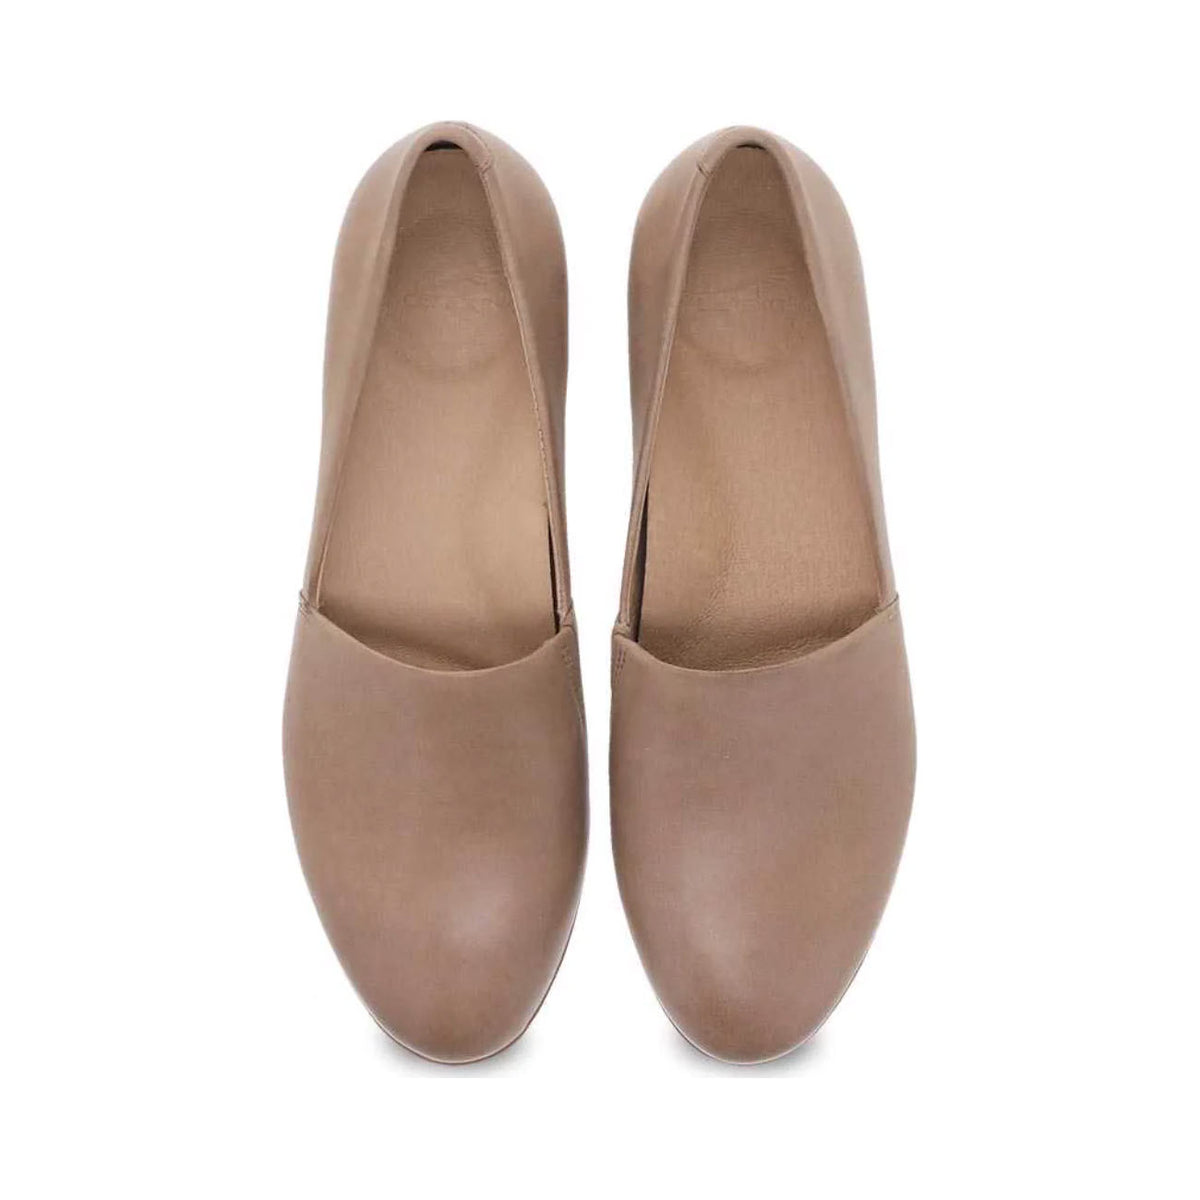 A pair of beige Dansko Larisa Taupe slip-on flat shoes isolated on a white background.